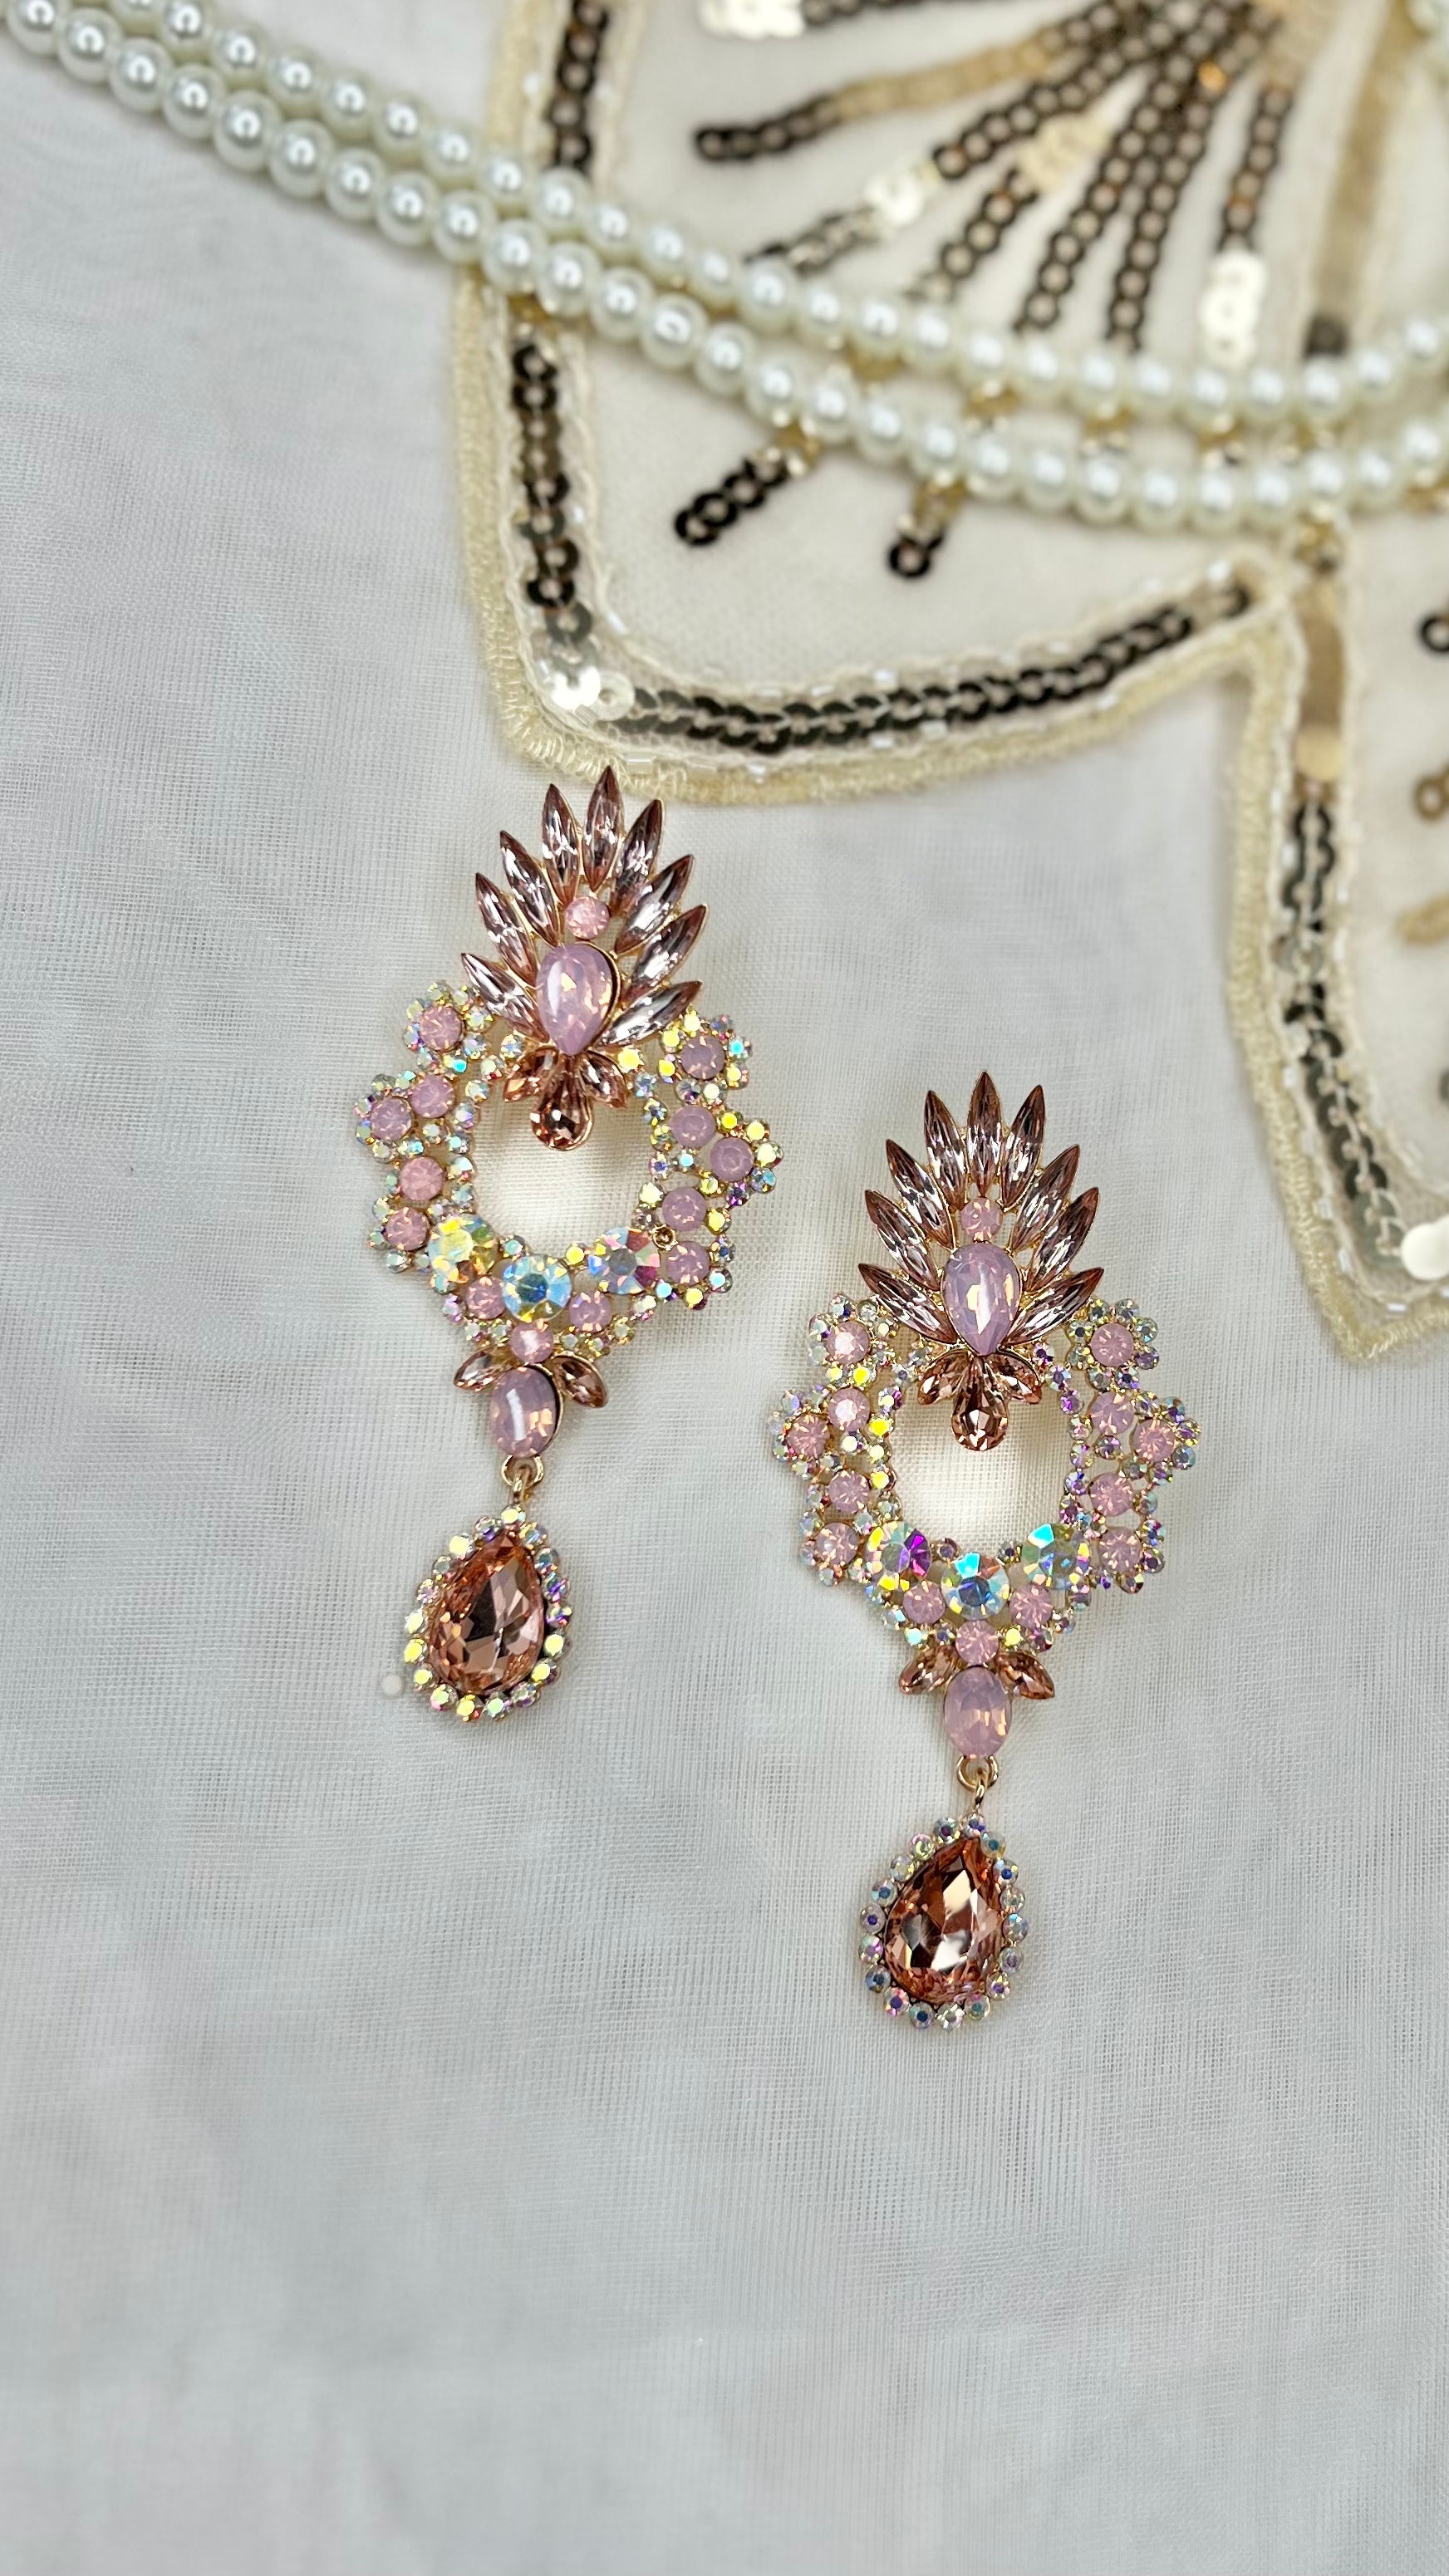 Gatsby Earrings - Fireworks: Shop our stunning range of Gatsby inspired dangle earrings. Each pair is decorated with rhinestones ready to help you sparkle the night away
Material: alloy
Length:  - Ciao Bella Dresses 